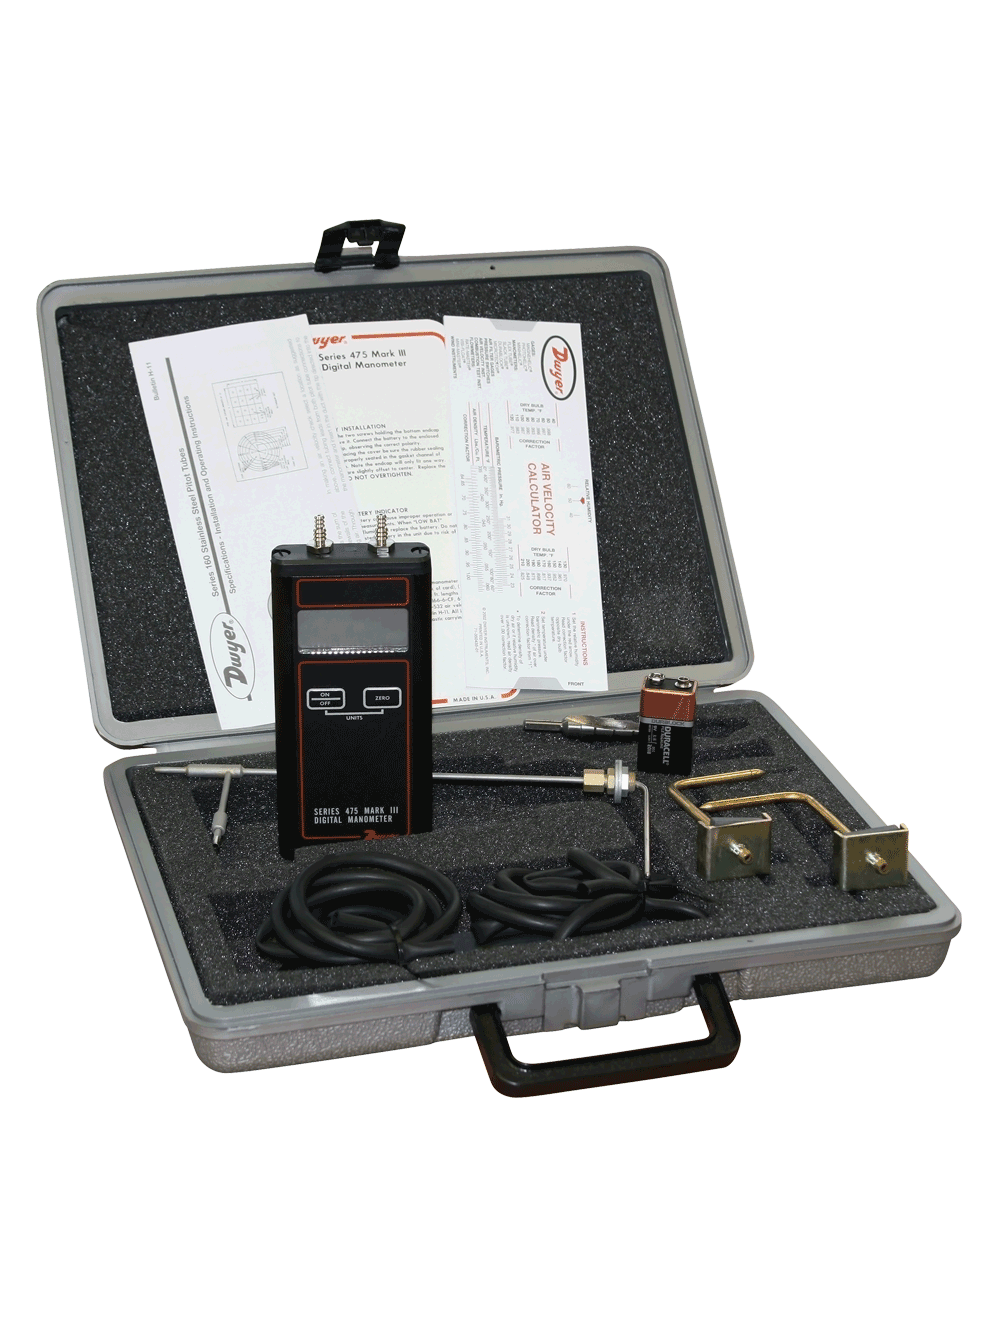 Model 475-1-FM-AV, Air Velocity Kit is small, light, and easy to use. No  set-up or leveling needed. Indispensable test kit for the plant engineer,  industrial hygenist, and HVAC technician.